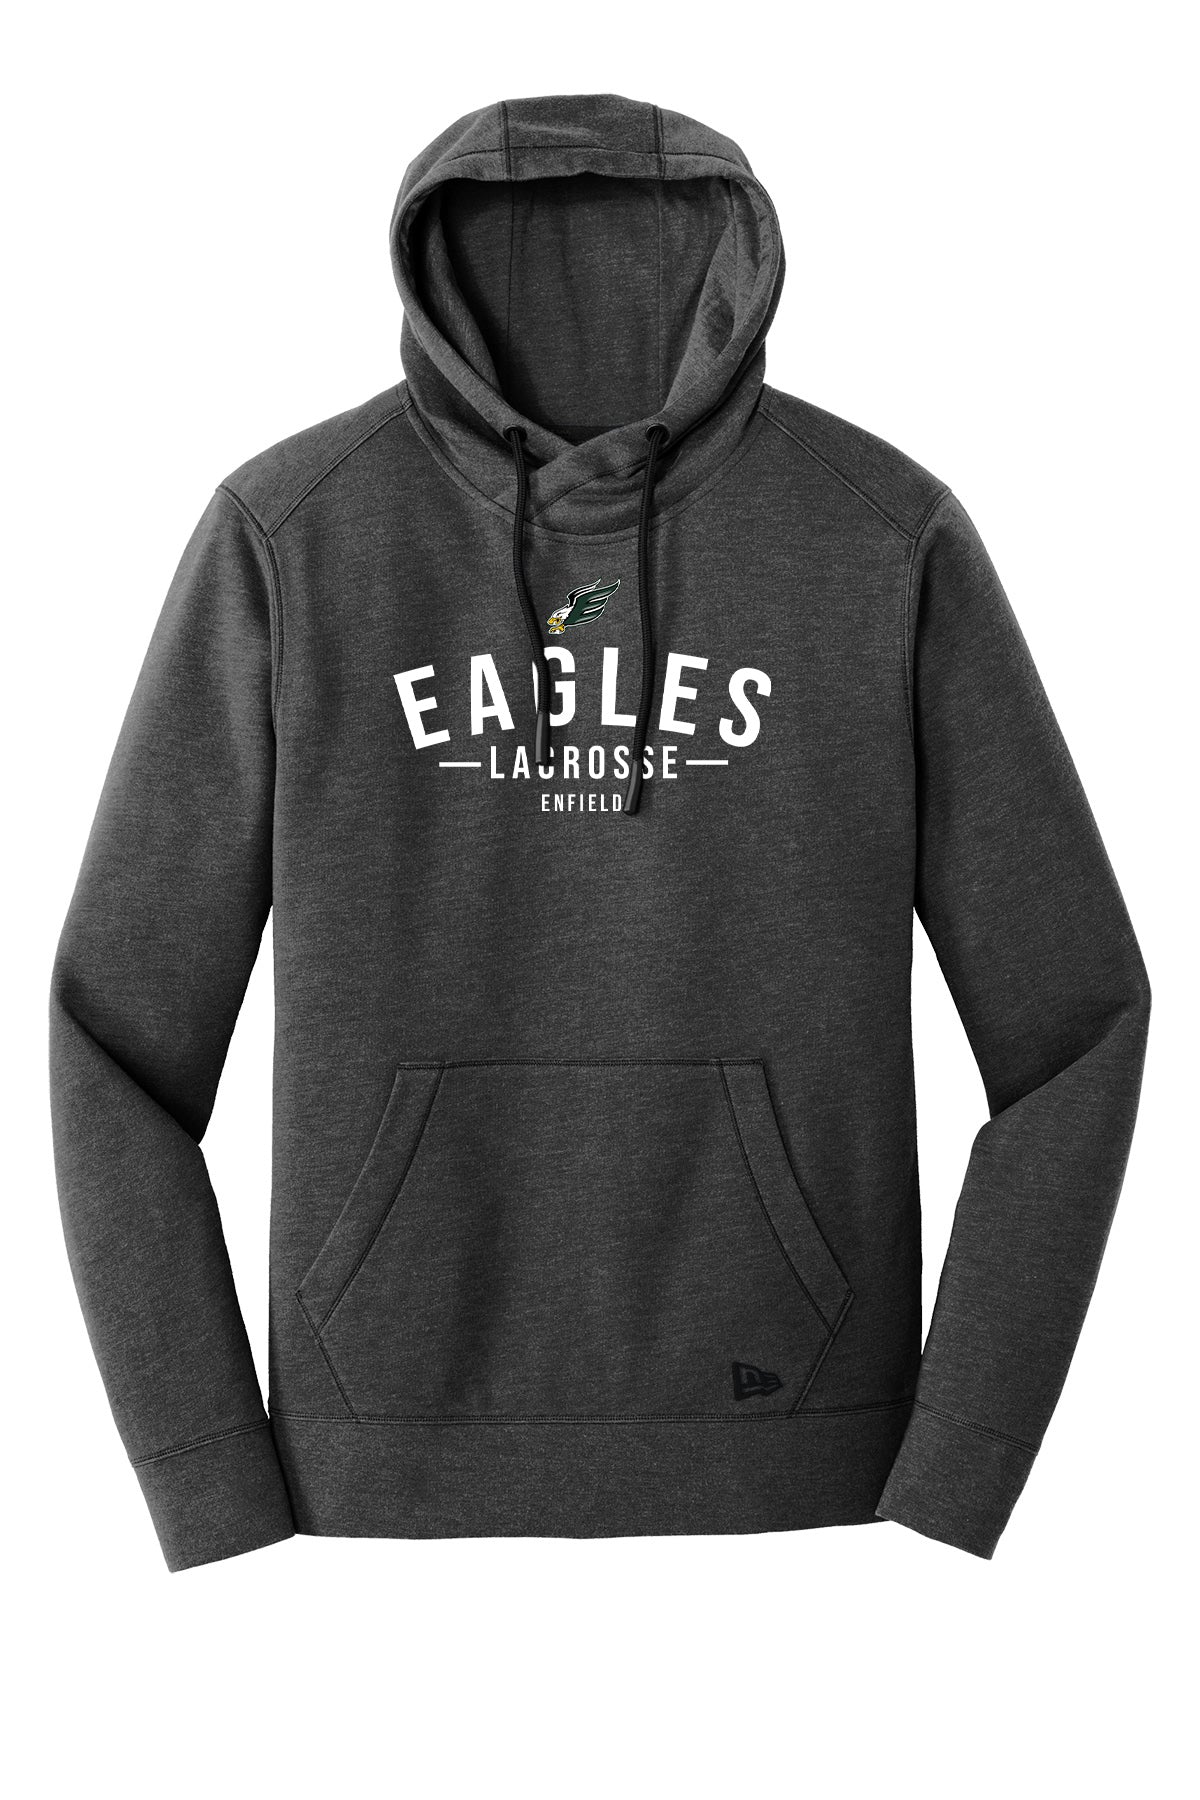 Enfield Lacrosse Adult Hoodie "Classic" - NEA510 (color options available)